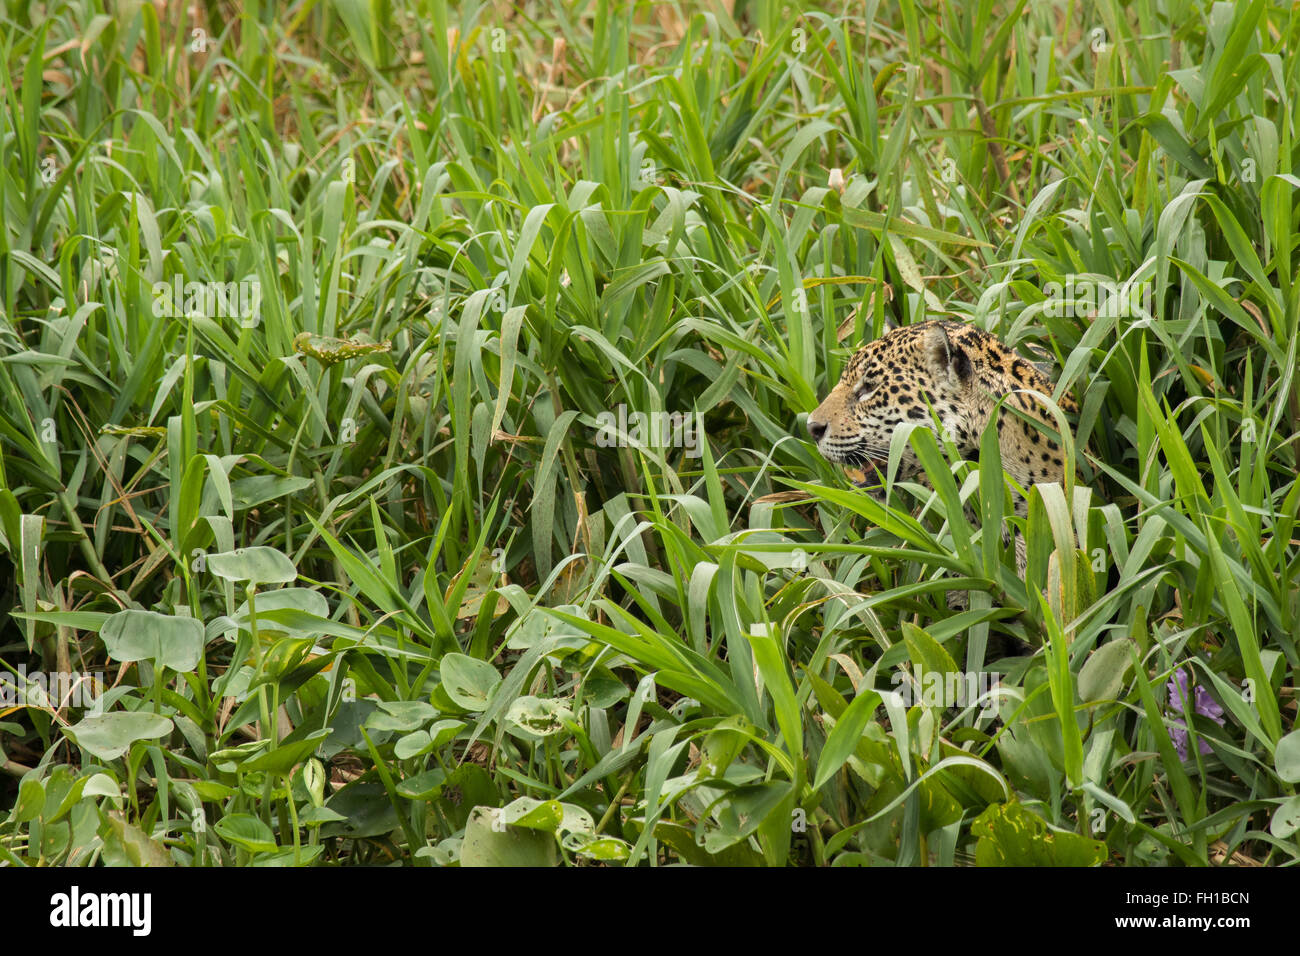 A wild sub-adult female jaguar hiding on the banks of the Cuiaba river in the Pantanal, Brazil. Stock Photo